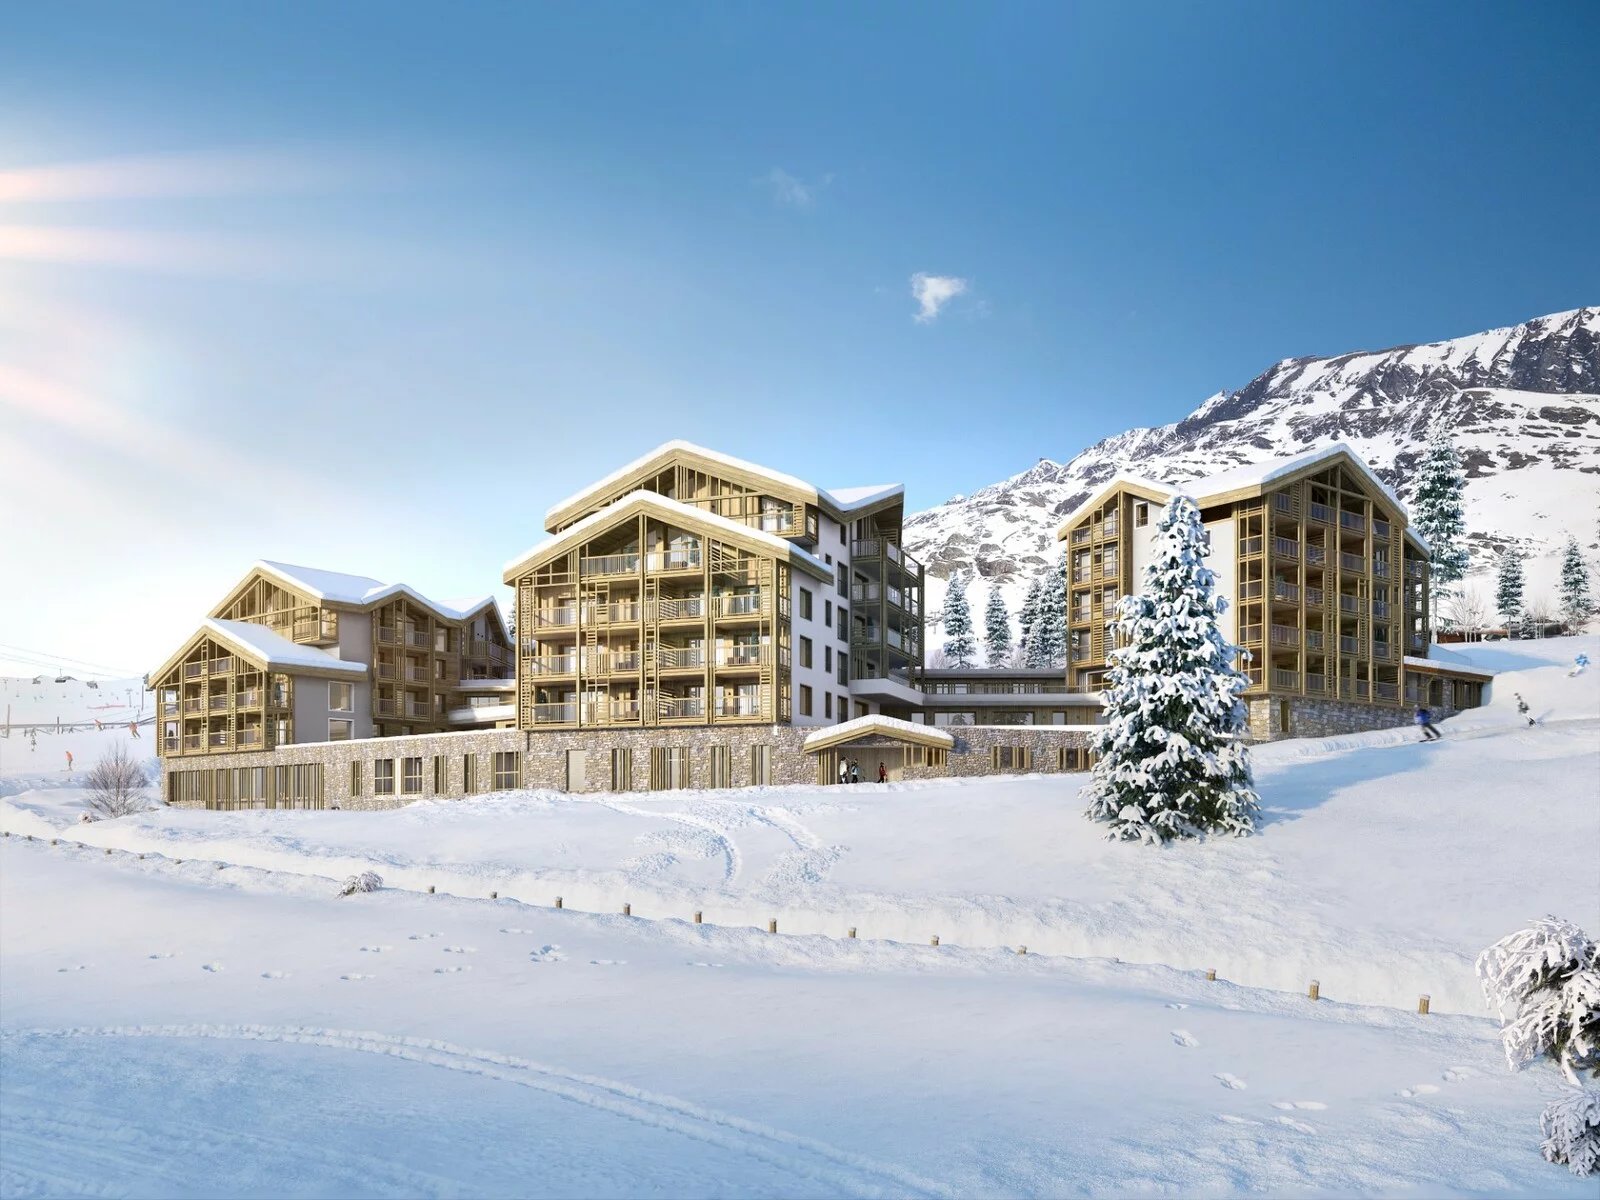 ONE BEDROOM APARTMENT IN A NEW RESIDENCE WITH SKIS